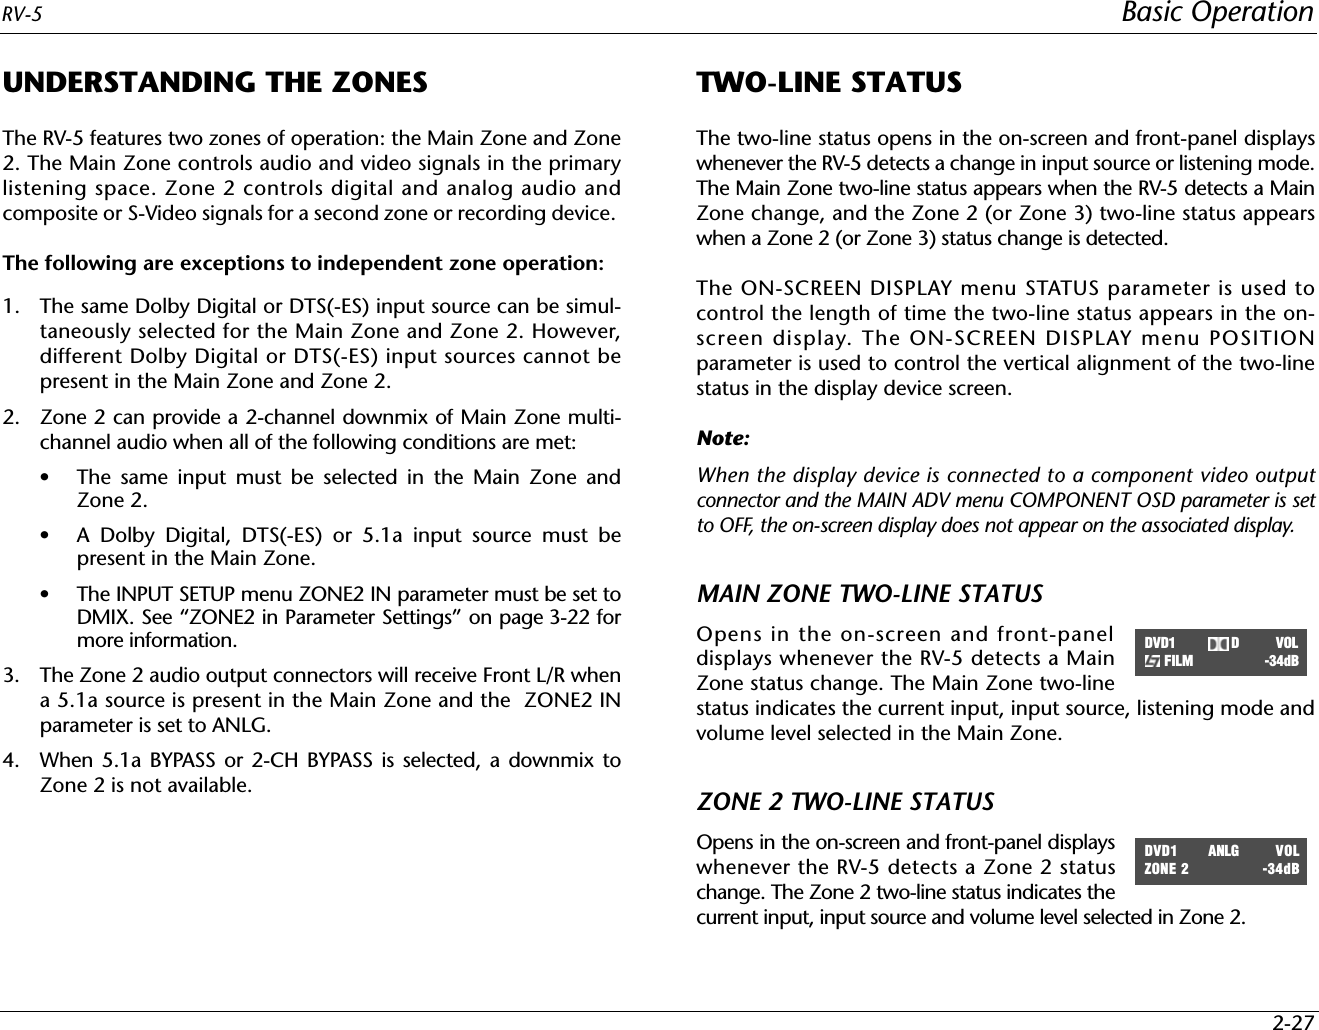 RV-5 Basic Operation2-27UNDERSTANDING THE ZONESThe RV-5 features two zones of operation: the Main Zone and Zone2. The Main Zone controls audio and video signals in the primarylistening space. Zone 2 controls digital and analog audio andcomposite or S-Video signals for a second zone or recording device. The following are exceptions to independent zone operation:1. The same Dolby Digital or DTS(-ES) input source can be simul-taneously selected for the Main Zone and Zone 2. However,different Dolby Digital or DTS(-ES) input sources cannot bepresent in the Main Zone and Zone 2.2. Zone 2 can provide a 2-channel downmix of Main Zone multi-channel audio when all of the following conditions are met:• The same input must be selected in the Main Zone andZone 2.• A Dolby Digital, DTS(-ES) or 5.1a input source must bepresent in the Main Zone.• The INPUT SETUP menu ZONE2 IN parameter must be set toDMIX. See “ZONE2 in Parameter Settings” on page 3-22 formore information.3. The Zone 2 audio output connectors will receive Front L/R whena 5.1a source is present in the Main Zone and the  ZONE2 INparameter is set to ANLG.4. When 5.1a BYPASS or 2-CH BYPASS is selected, a downmix toZone 2 is not available.TWO-LINE STATUSThe two-line status opens in the on-screen and front-panel displayswhenever the RV-5 detects a change in input source or listening mode.The Main Zone two-line status appears when the RV-5 detects a MainZone change, and the Zone 2 (or Zone 3) two-line status appearswhen a Zone 2 (or Zone 3) status change is detected.The ON-SCREEN DISPLAY menu STATUS parameter is used tocontrol the length of time the two-line status appears in the on-screen display. The ON-SCREEN DISPLAY menu POSITIONparameter is used to control the vertical alignment of the two-linestatus in the display device screen.Note:When the display device is connected to a component video outputconnector and the MAIN ADV menu COMPONENT OSD parameter is setto OFF, the on-screen display does not appear on the associated display.MAIN ZONE TWO-LINE STATUSOpens in the on-screen and front-paneldisplays whenever the RV-5 detects a MainZone status change. The Main Zone two-linestatus indicates the current input, input source, listening mode andvolume level selected in the Main Zone.ZONE 2 TWO-LINE STATUSOpens in the on-screen and front-panel displayswhenever the RV-5 detects a Zone 2 statuschange. The Zone 2 two-line status indicates thecurrent input, input source and volume level selected in Zone 2.DVD1          D          VOLFILM -34dBDVD1     ANLG          VOLZONE 2 -34dB